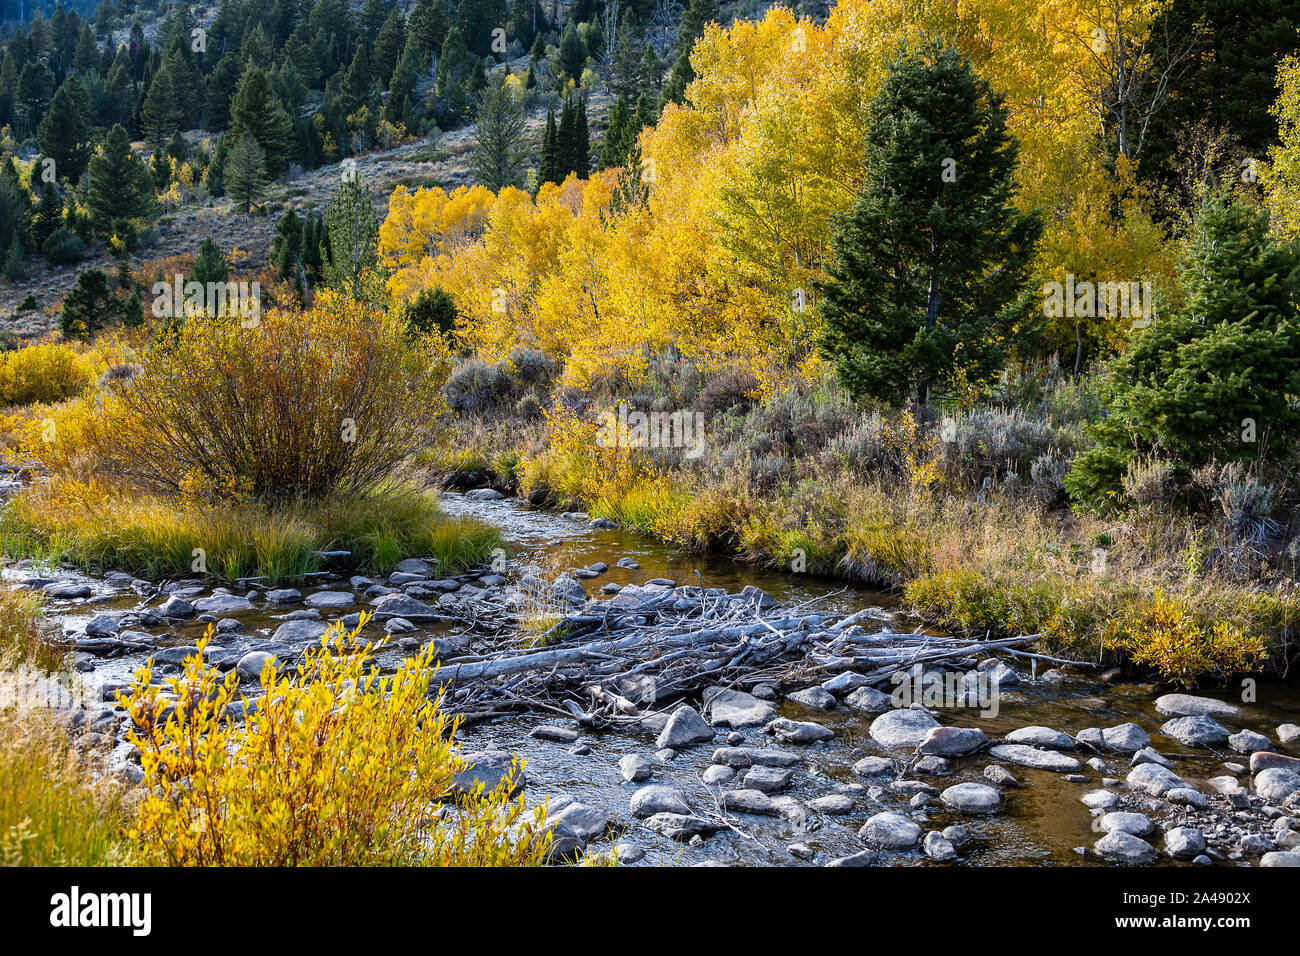 The fall colors on the trees along Beaver Creek near US Highway 89, the Logan Canyon Scenic Byway in Logan Canyon, Uinta-Wasatch-Cache NF Utah, USA. Stock Photo